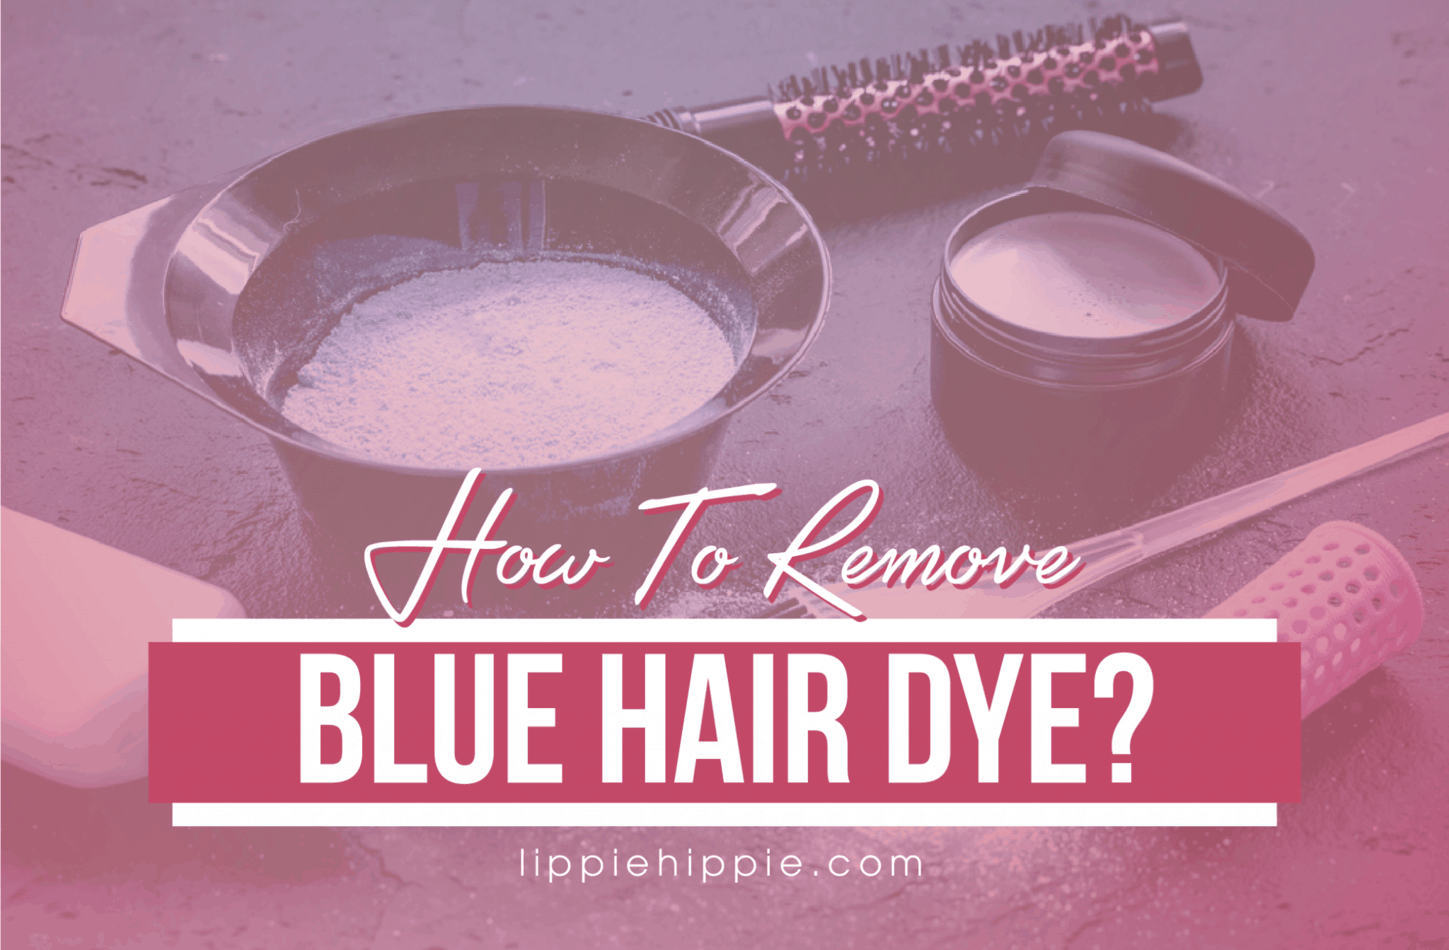 2. How to use ketchup to remove blue hair dye - wide 7